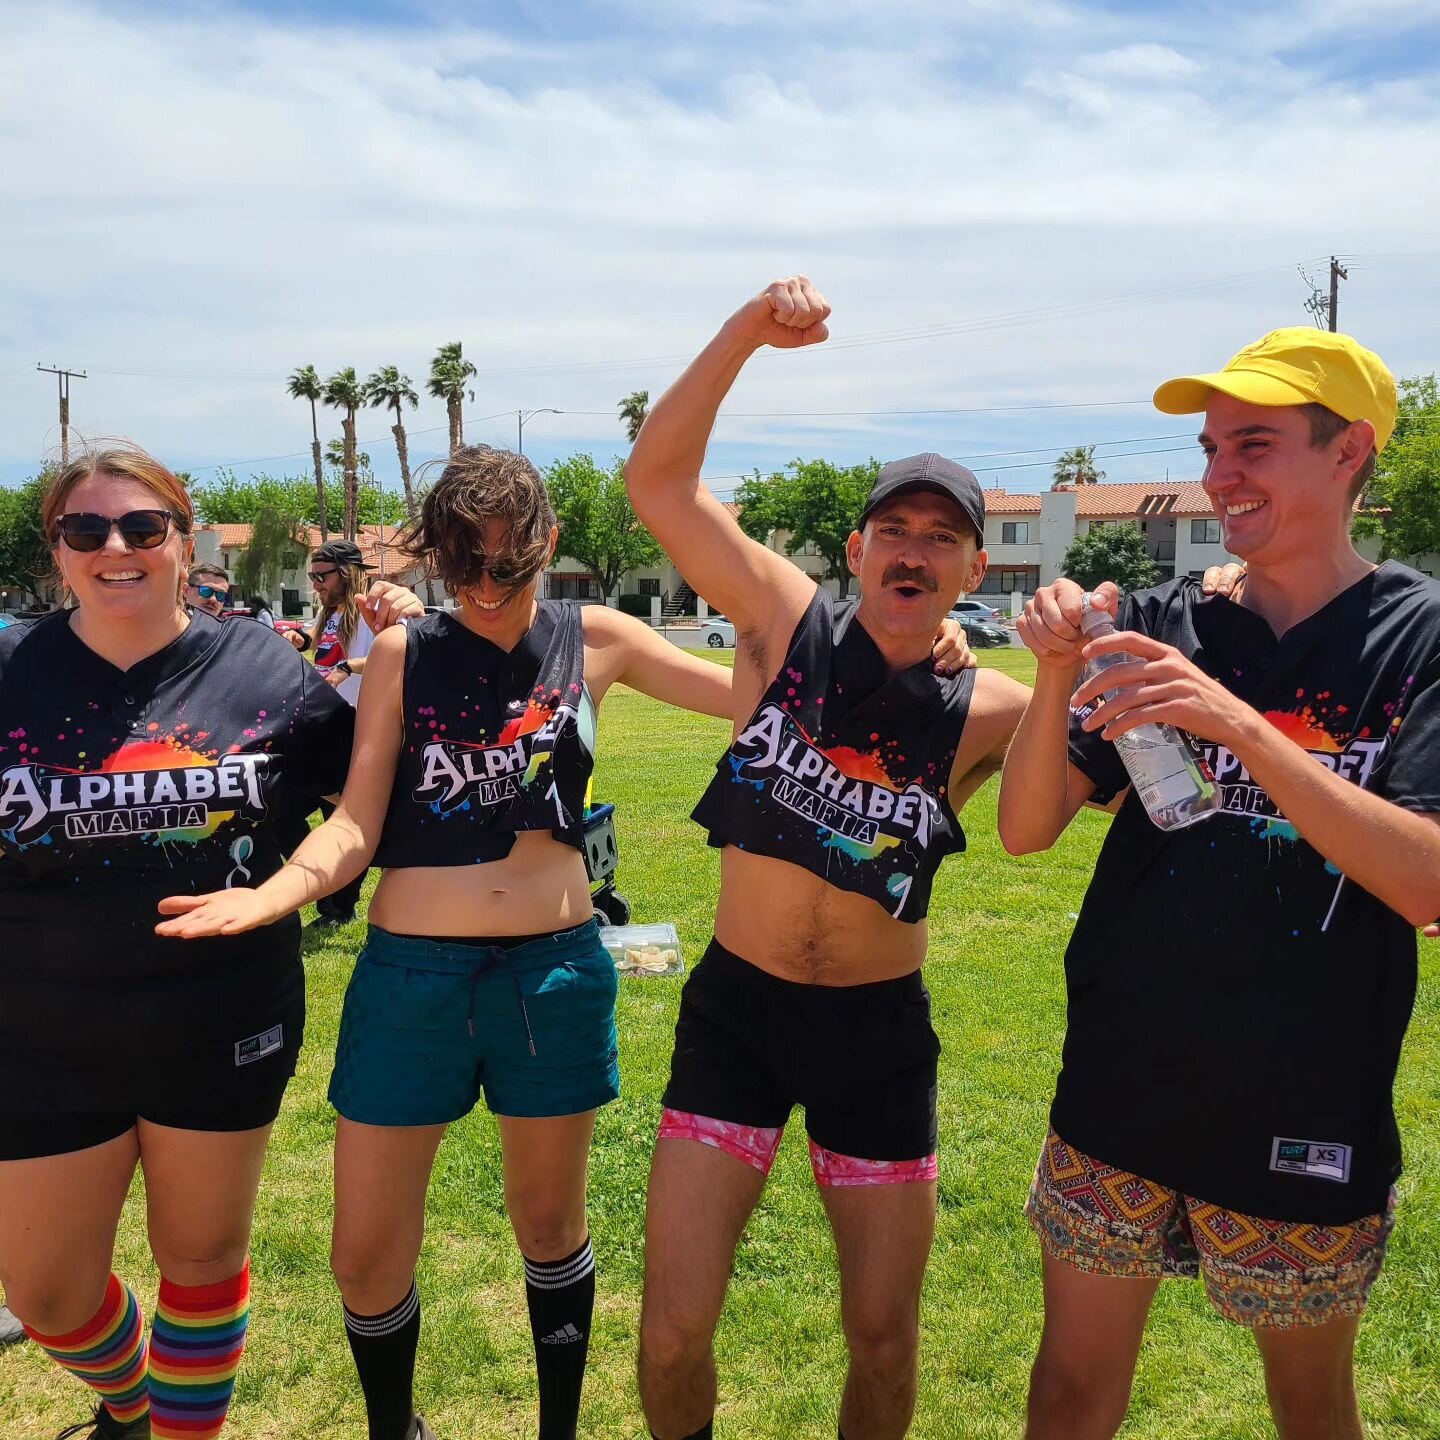 We saw some beautiful plays on the field this weekend and celebrated our amazing ump Bryan's birthday! 🌈👟🔴

#queercommunity #gayvegas #lasvegaslocals